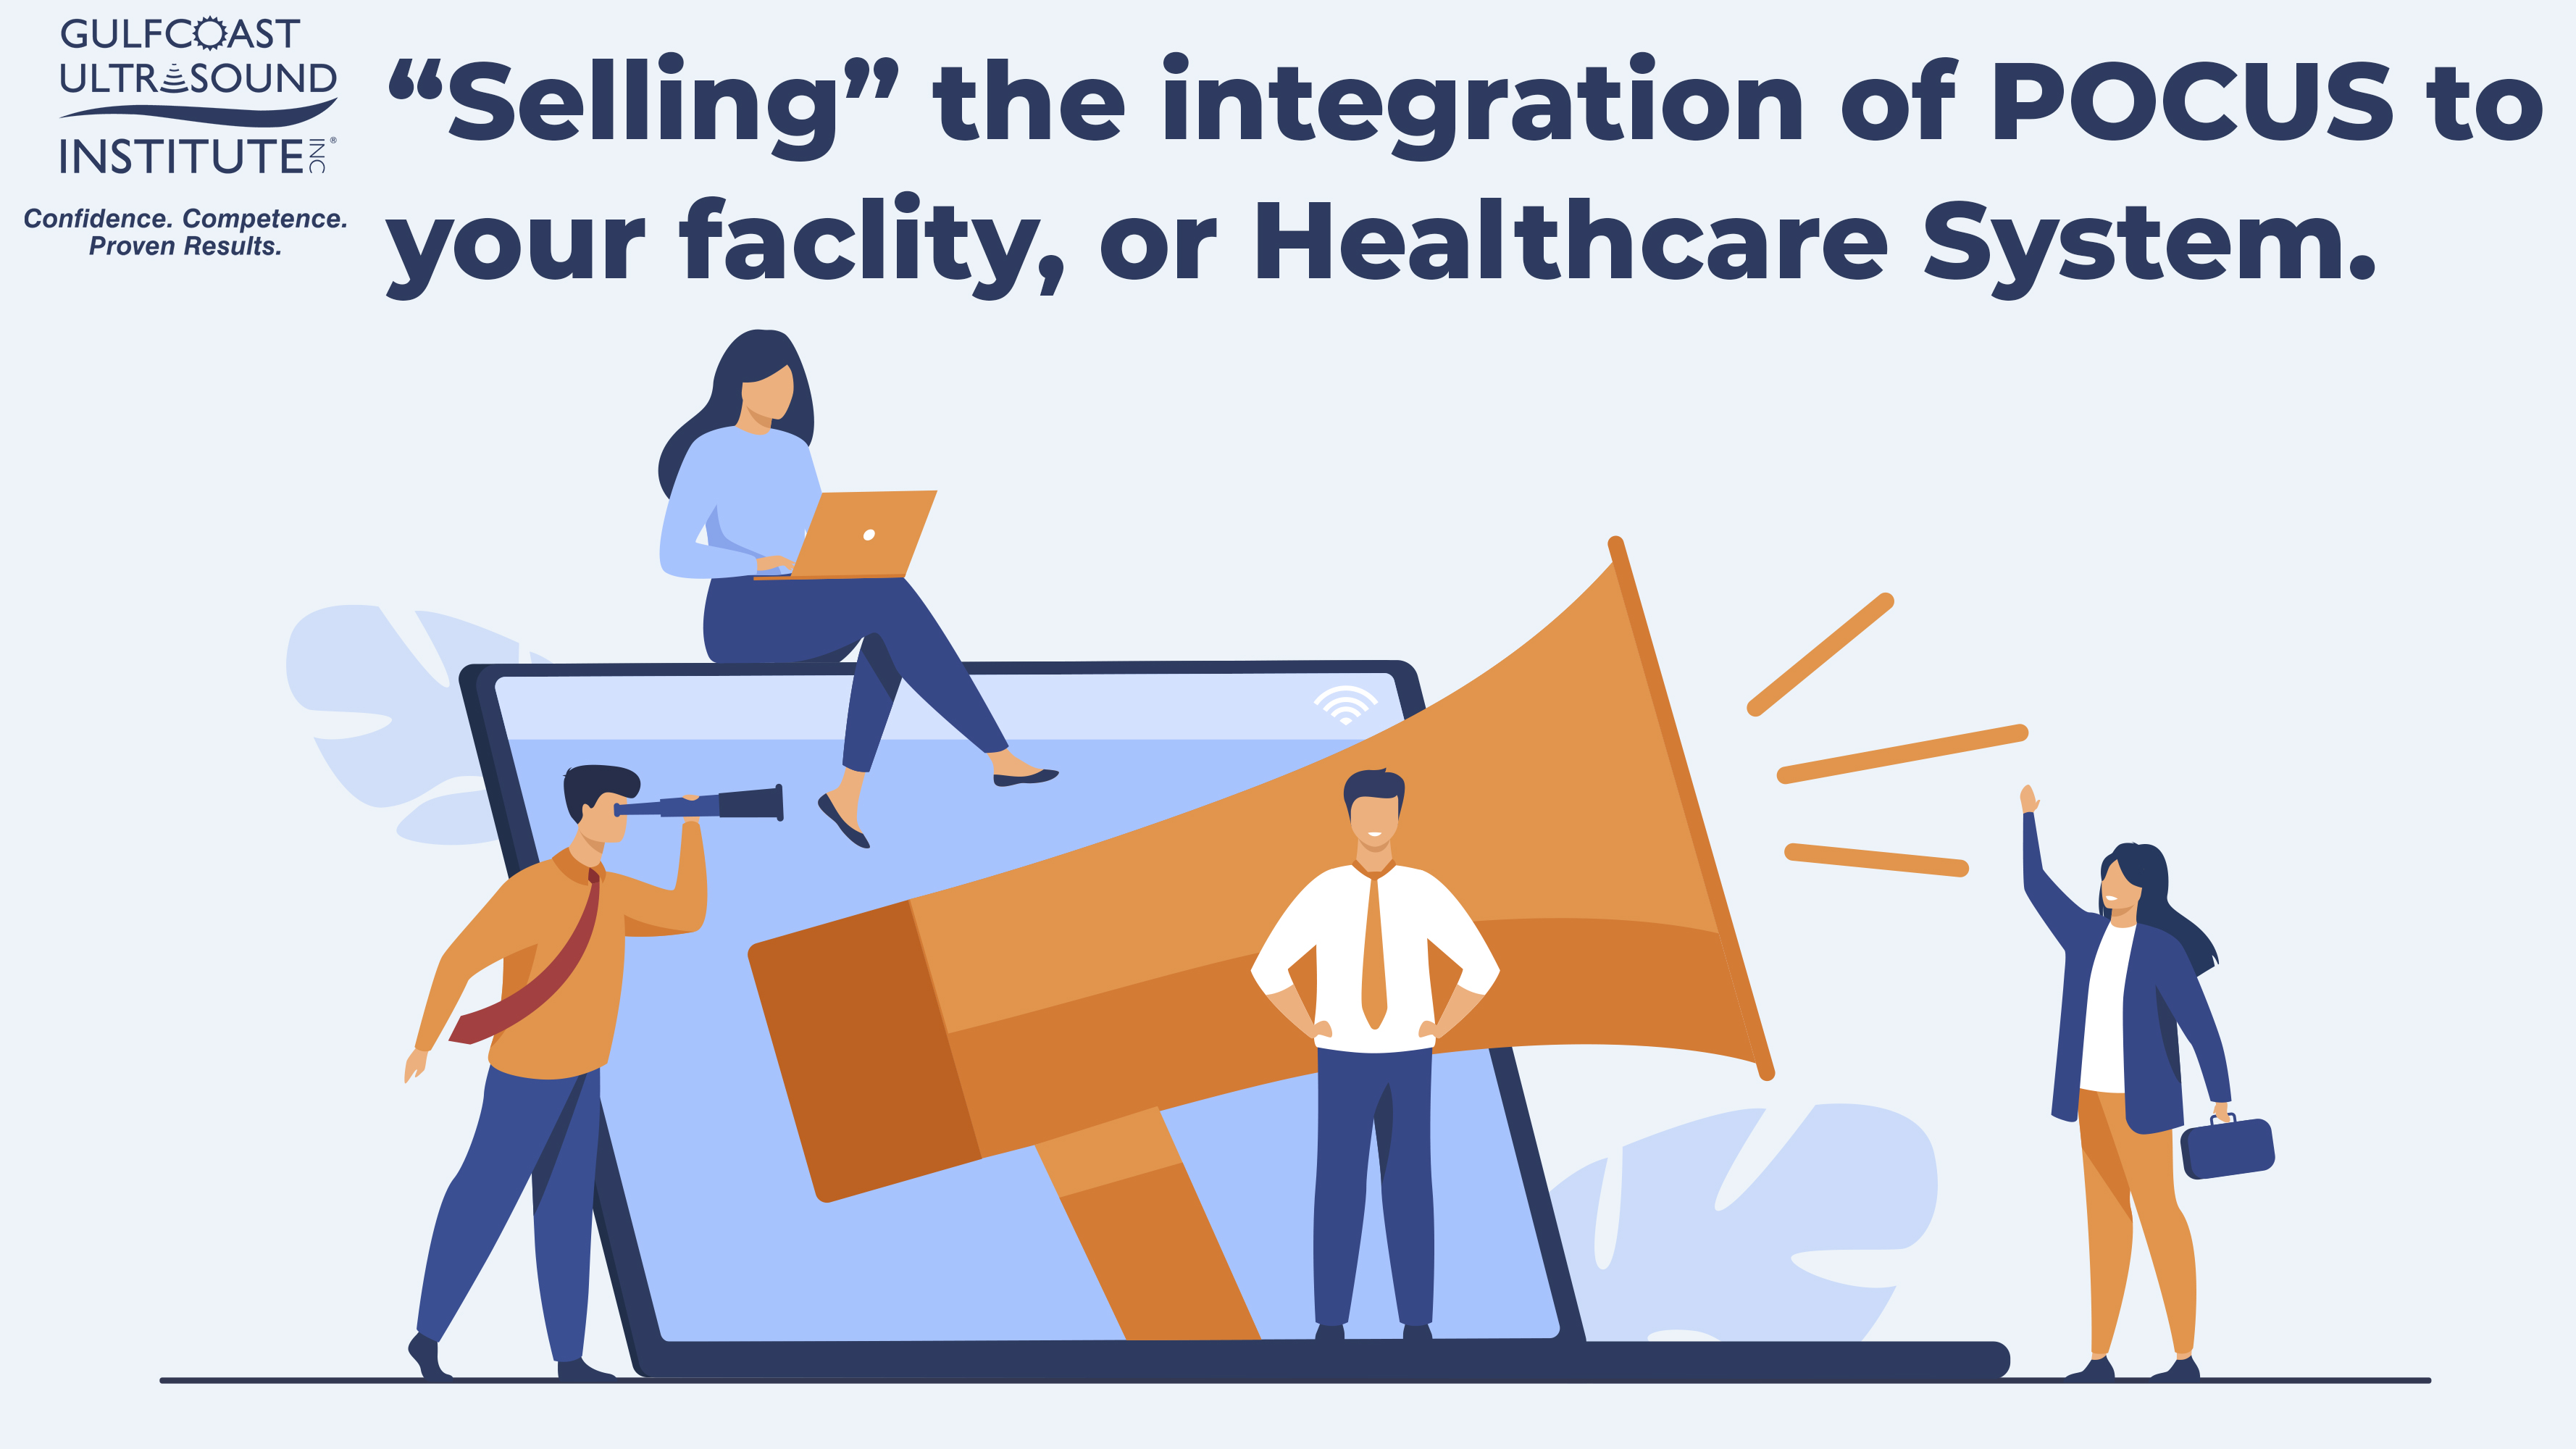 “Selling” the integration of POCUS to your facility or healthcare system